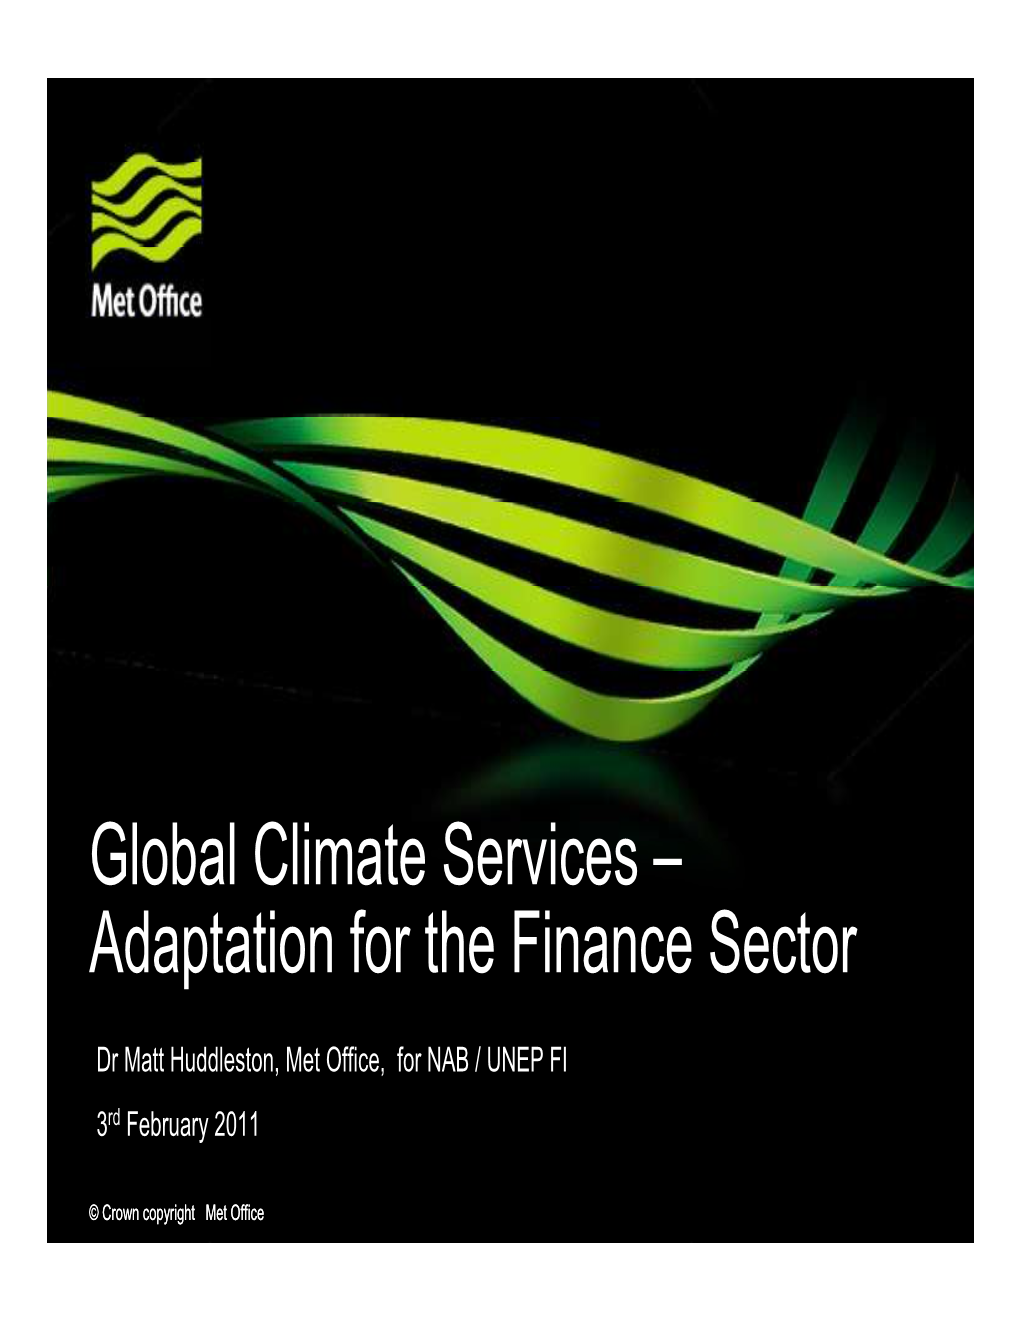 Global Climate Services – Adaptation for the Finance Sector